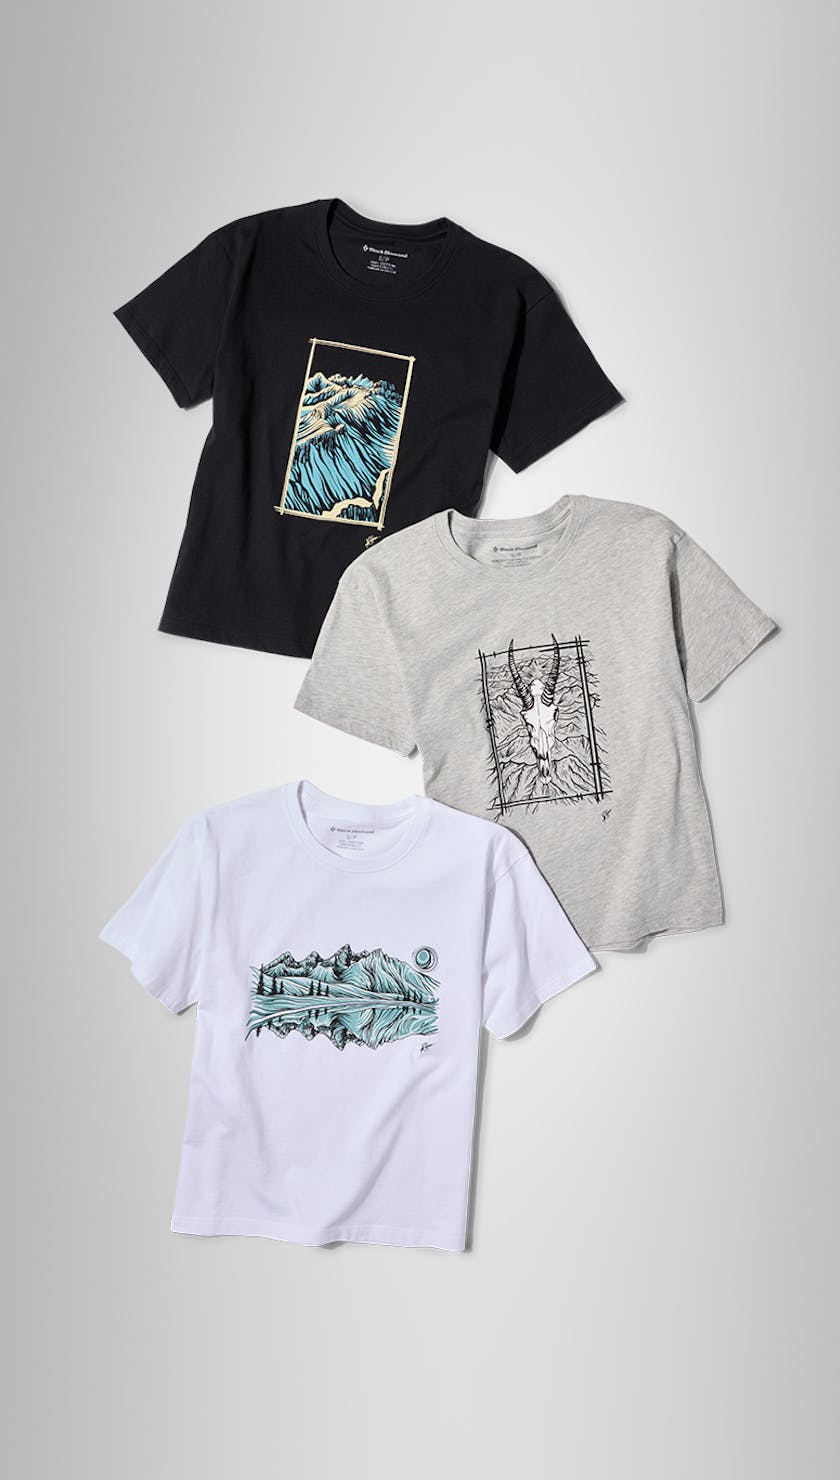 Artist Series Tees. The Kelly Halpin Collection.